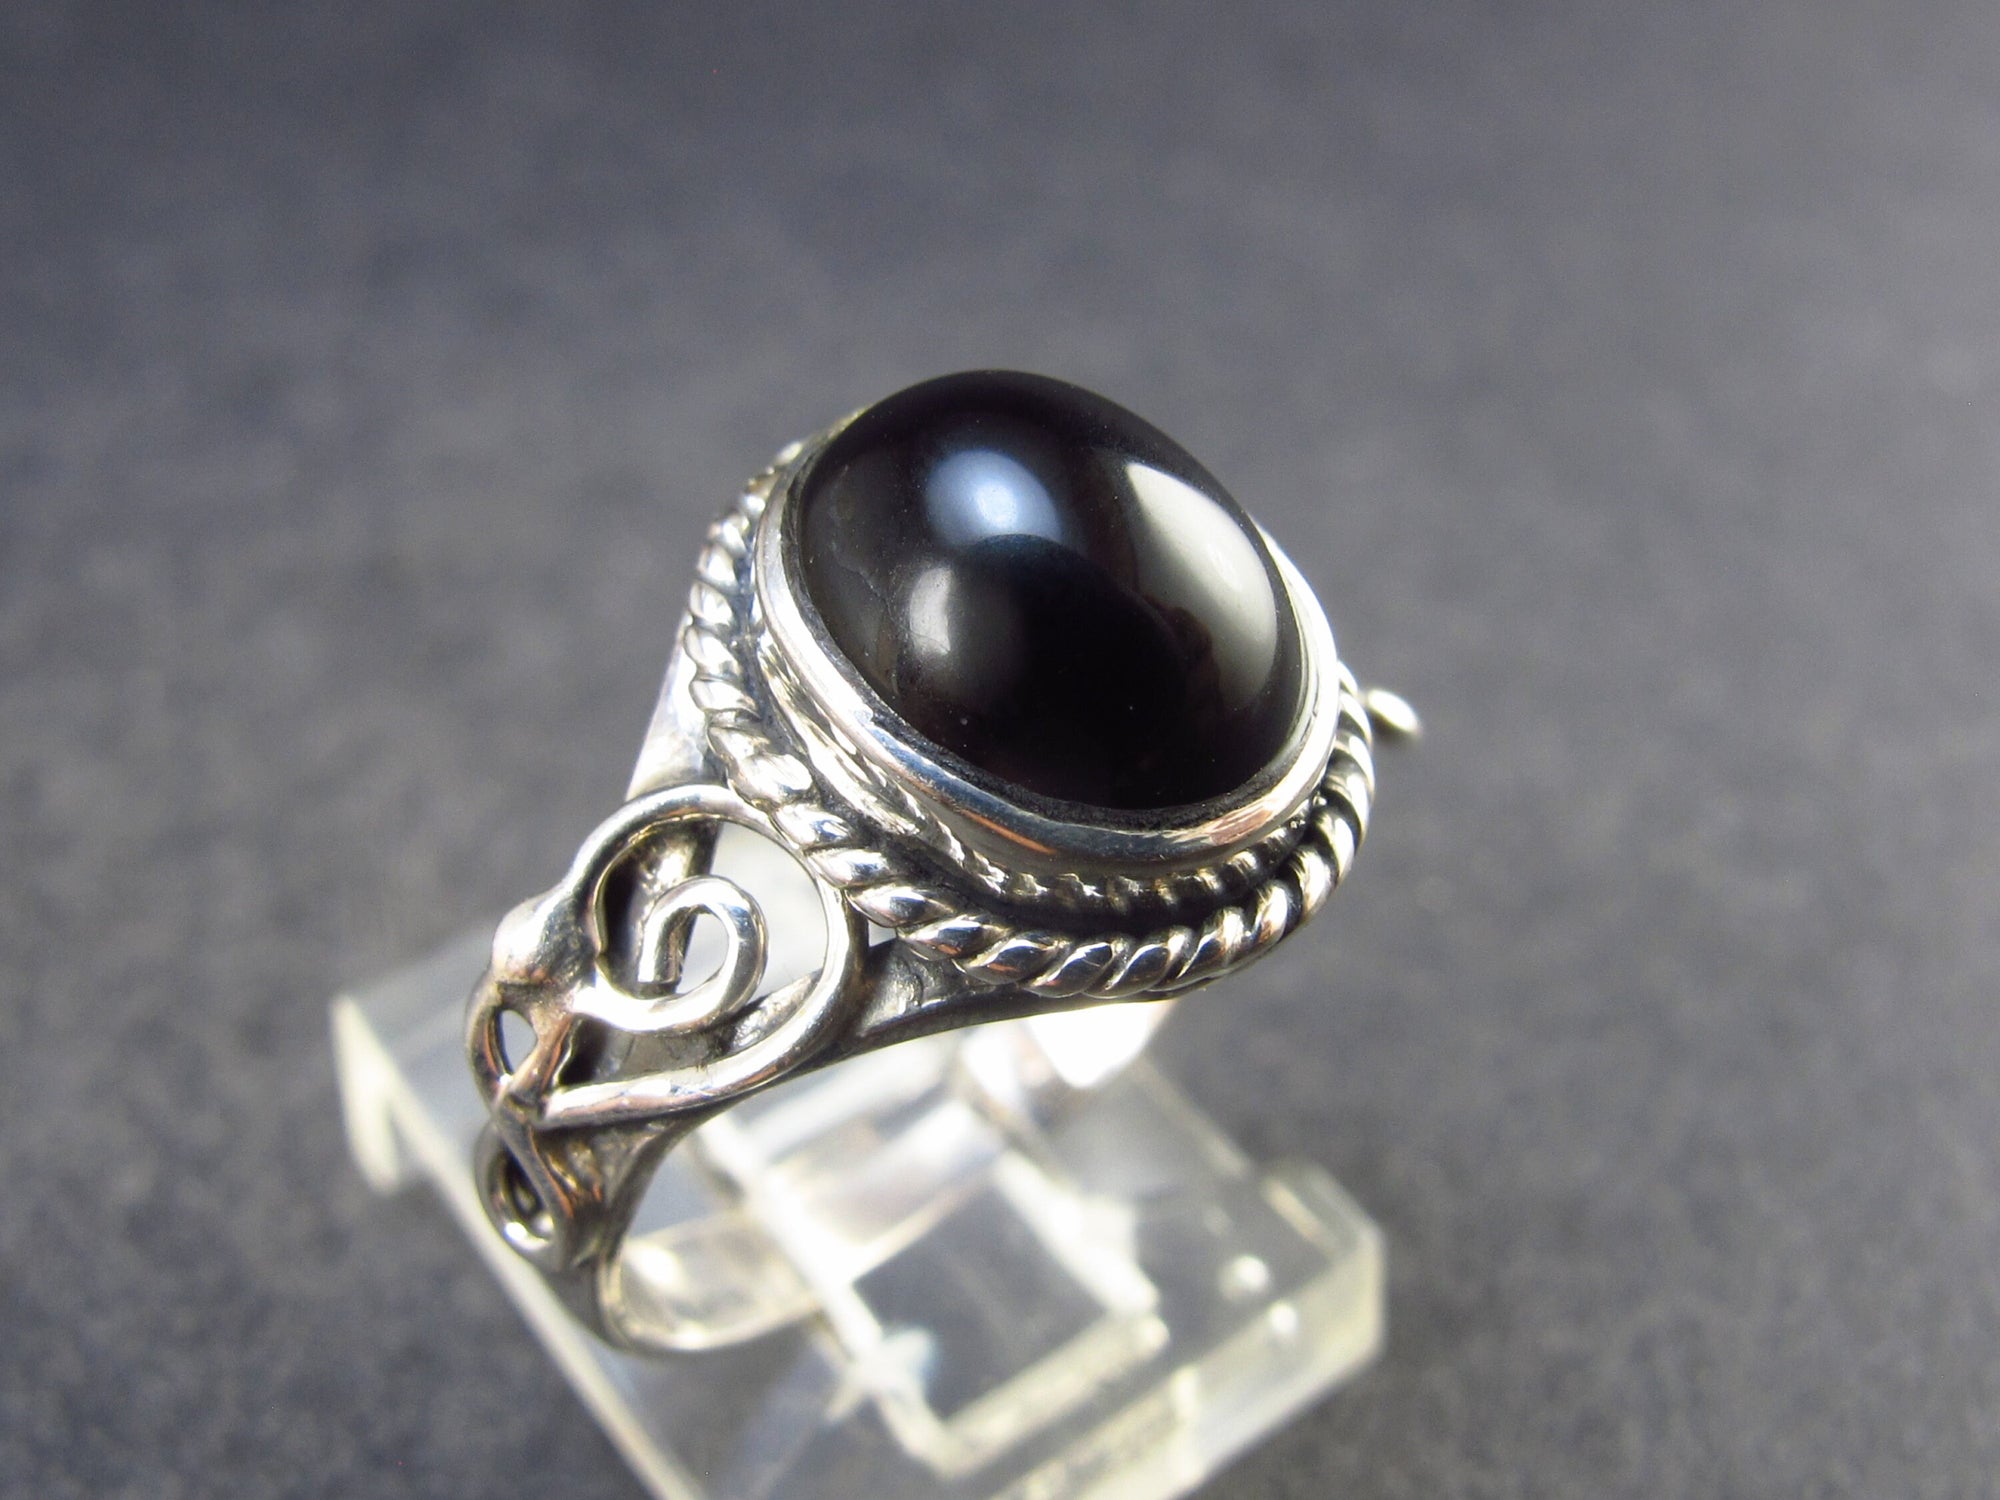 Hand Made Sterling Silver and Onyx Ring from Indonesia - Moonlight in Black  | NOVICA